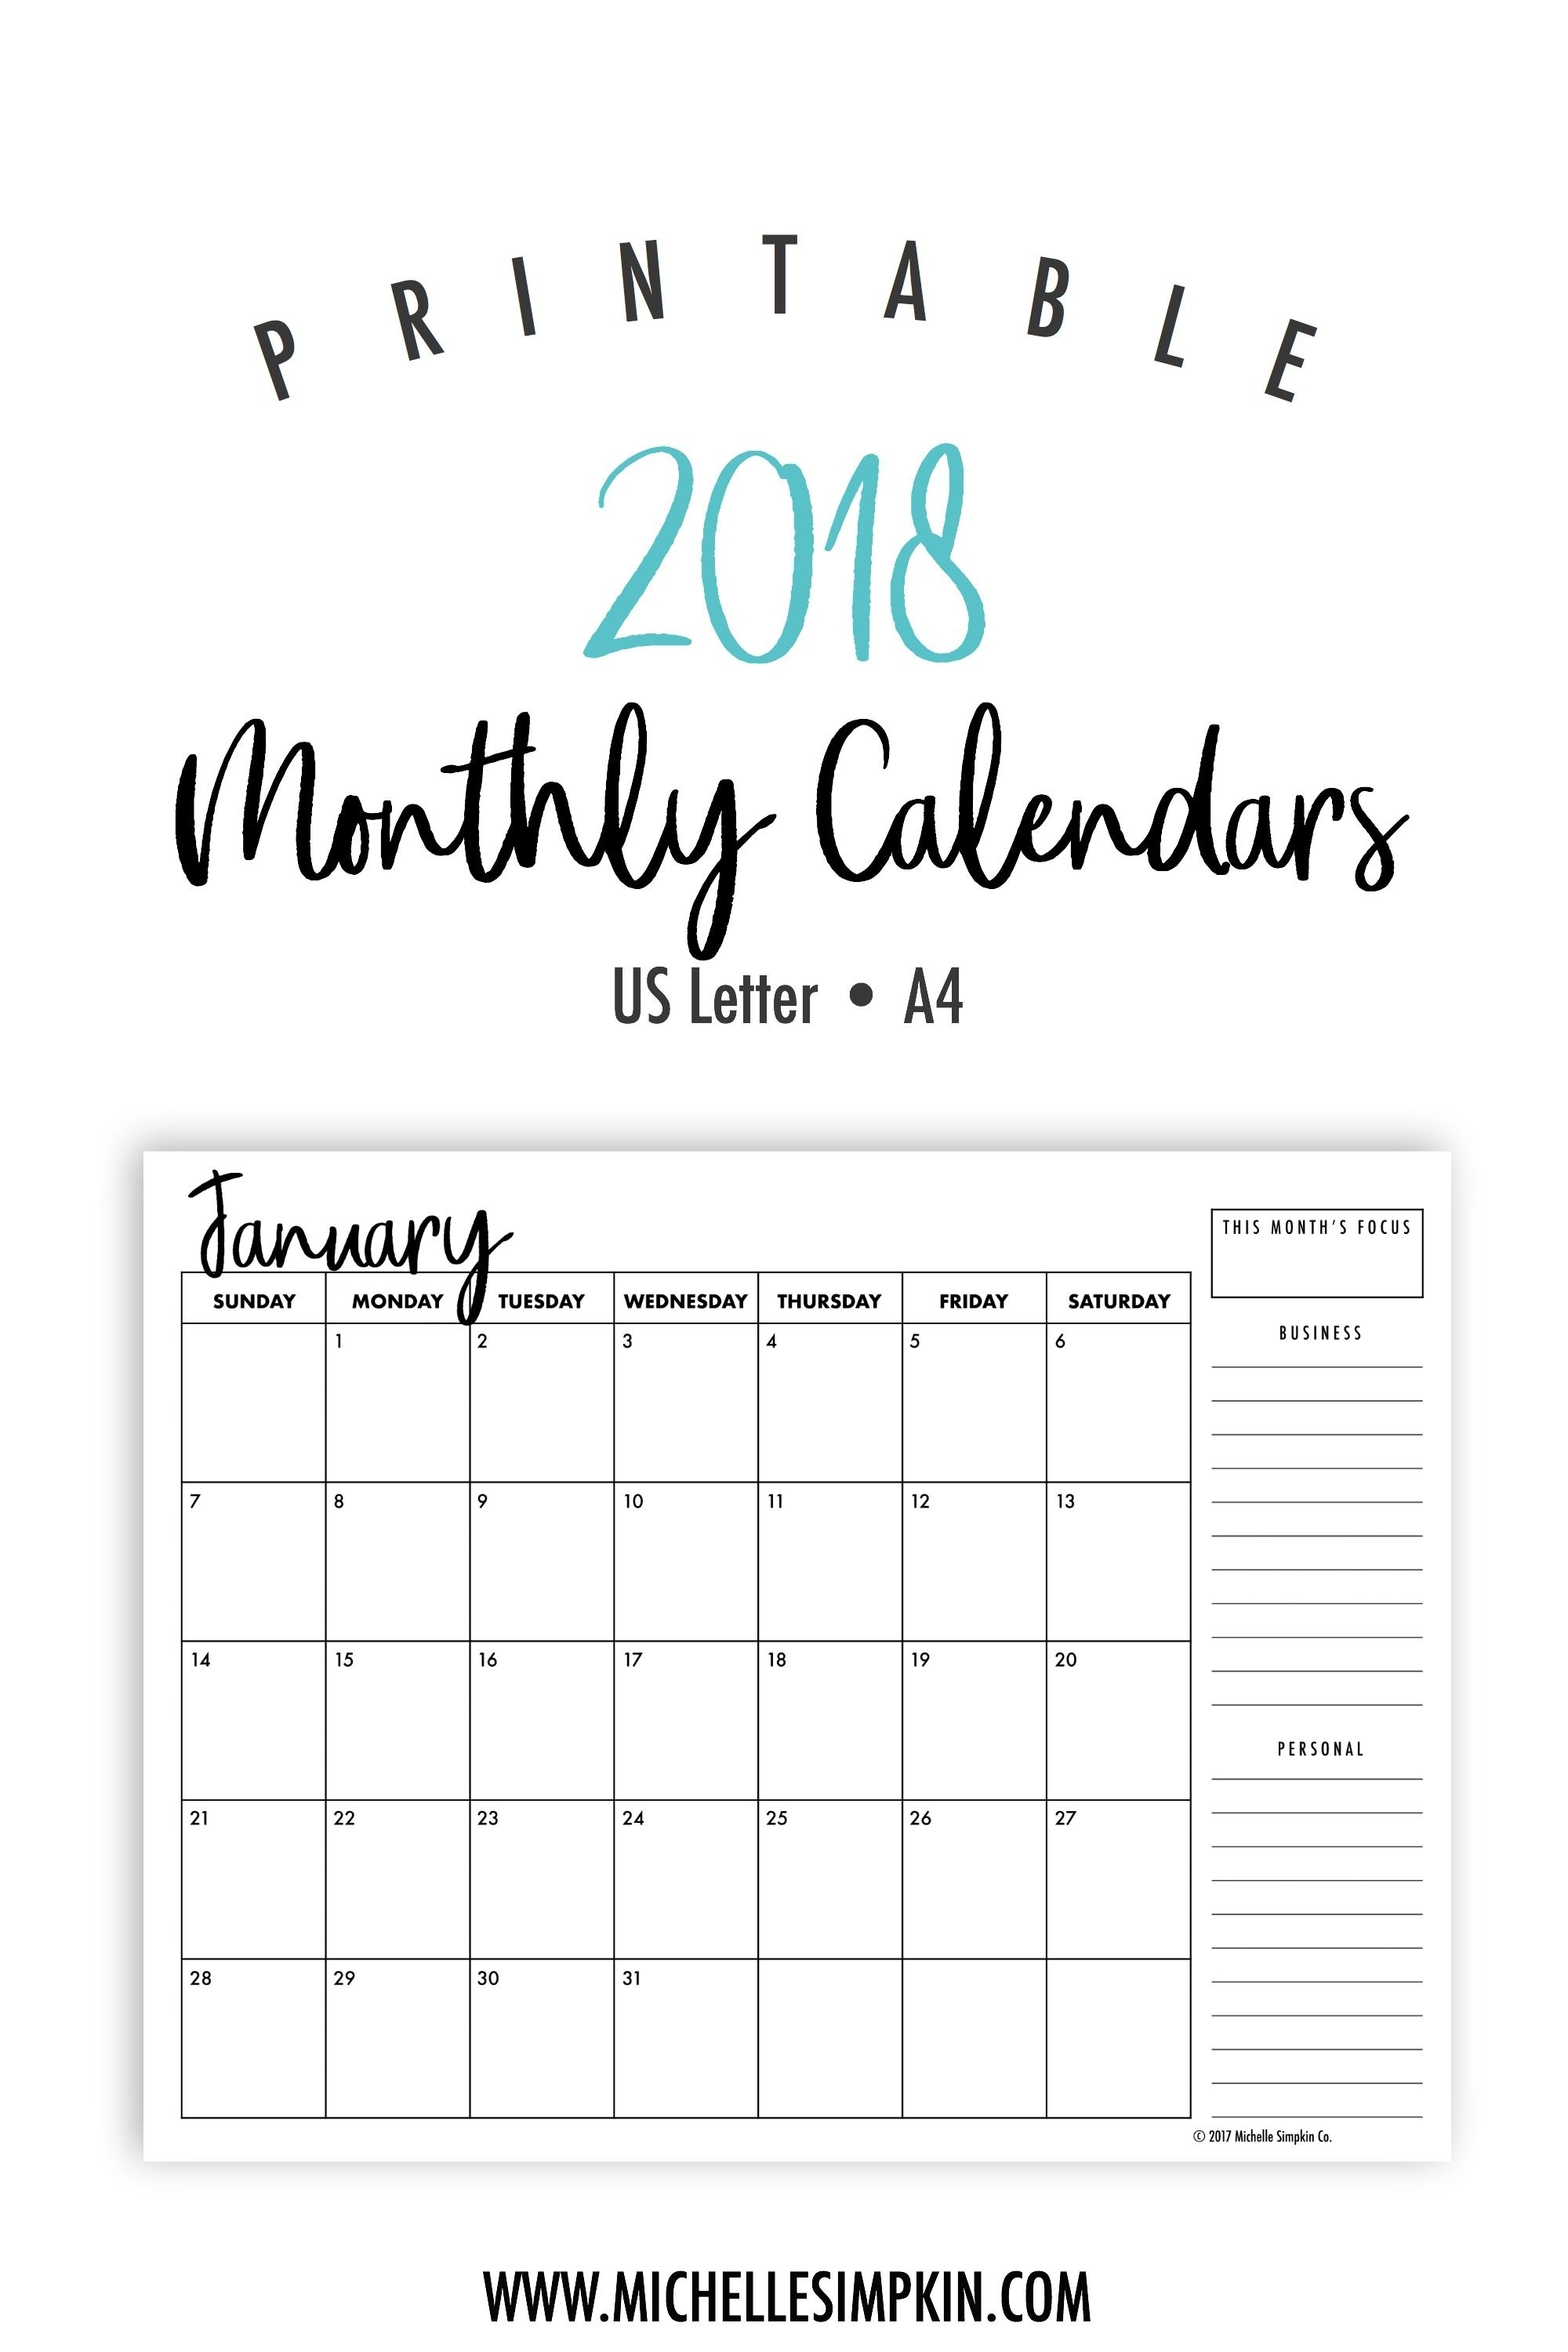 2018 Printable Calendars - Plan Out Your Year With These Ink pertaining to Pretty Printable Calendar 2020 Without Download